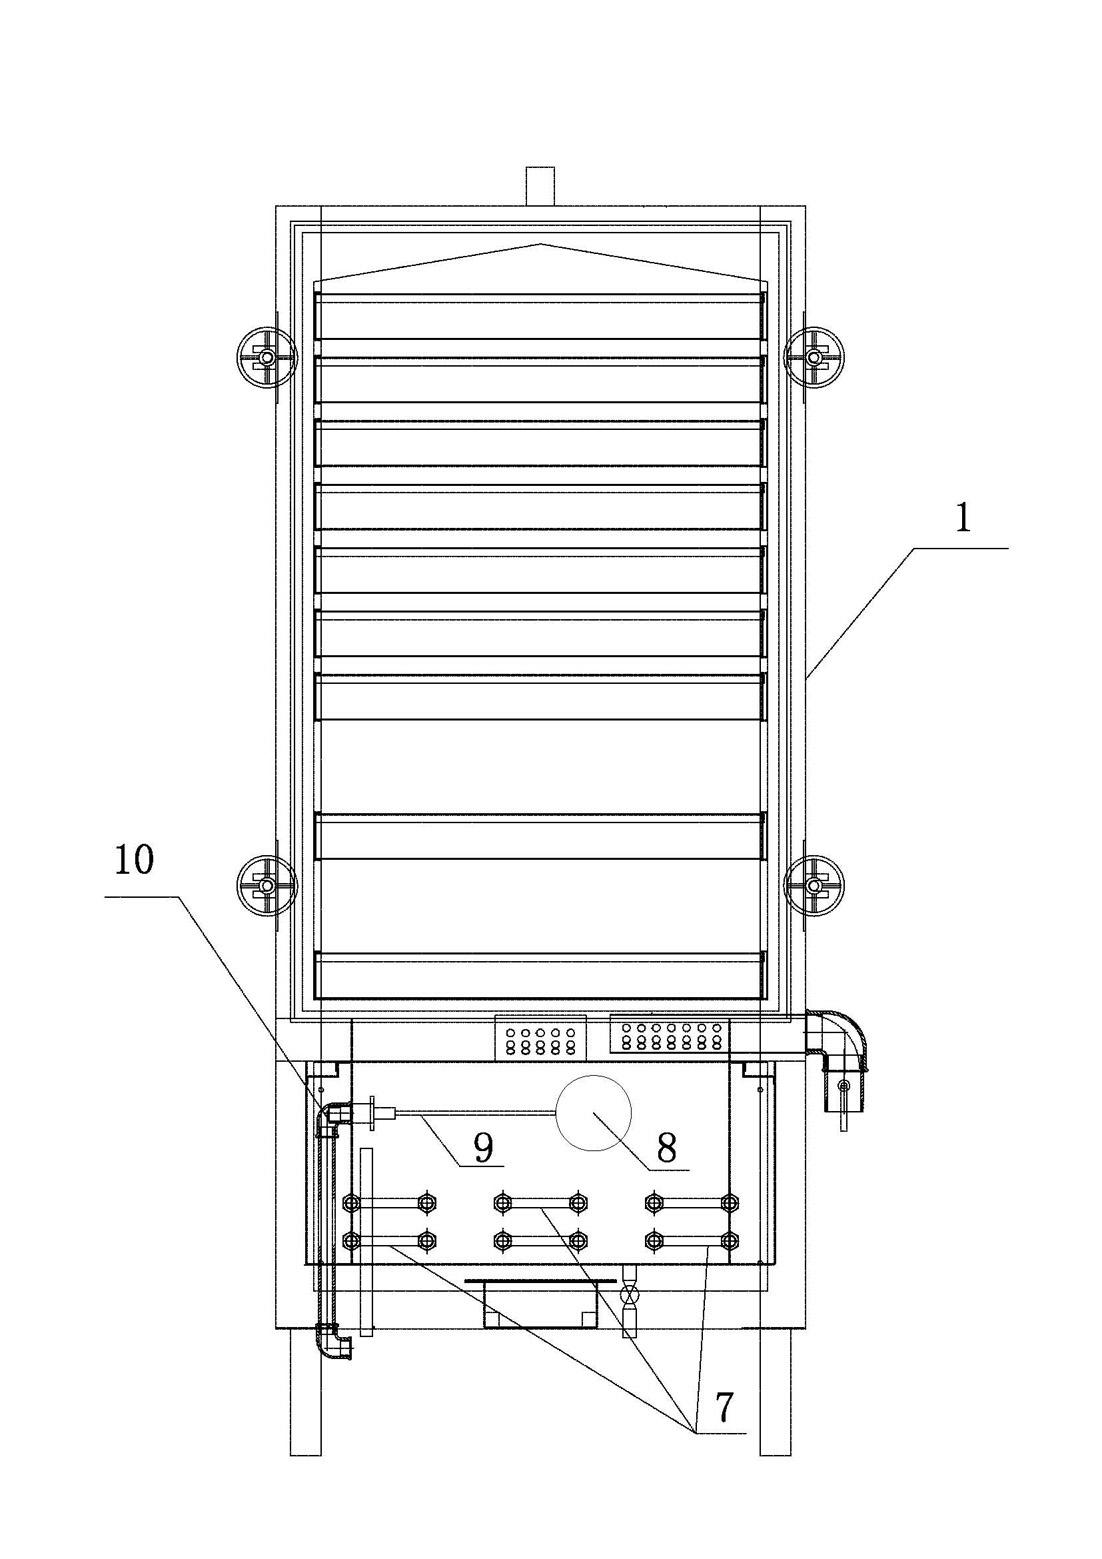 Rice steaming cabinet